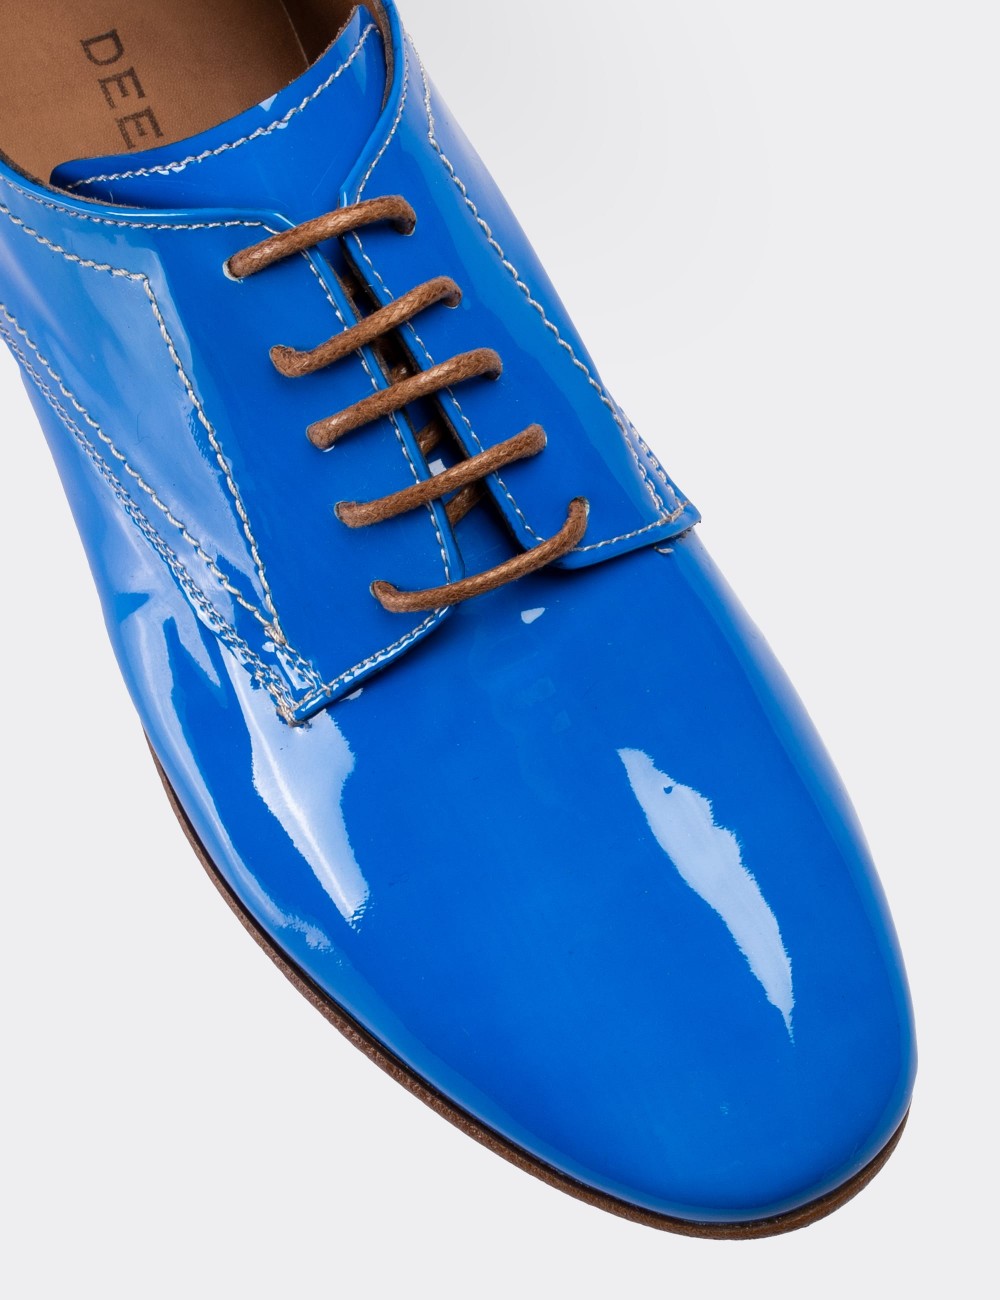 Blue Patent Leather Lace-up Shoes - 01430ZMVIC05